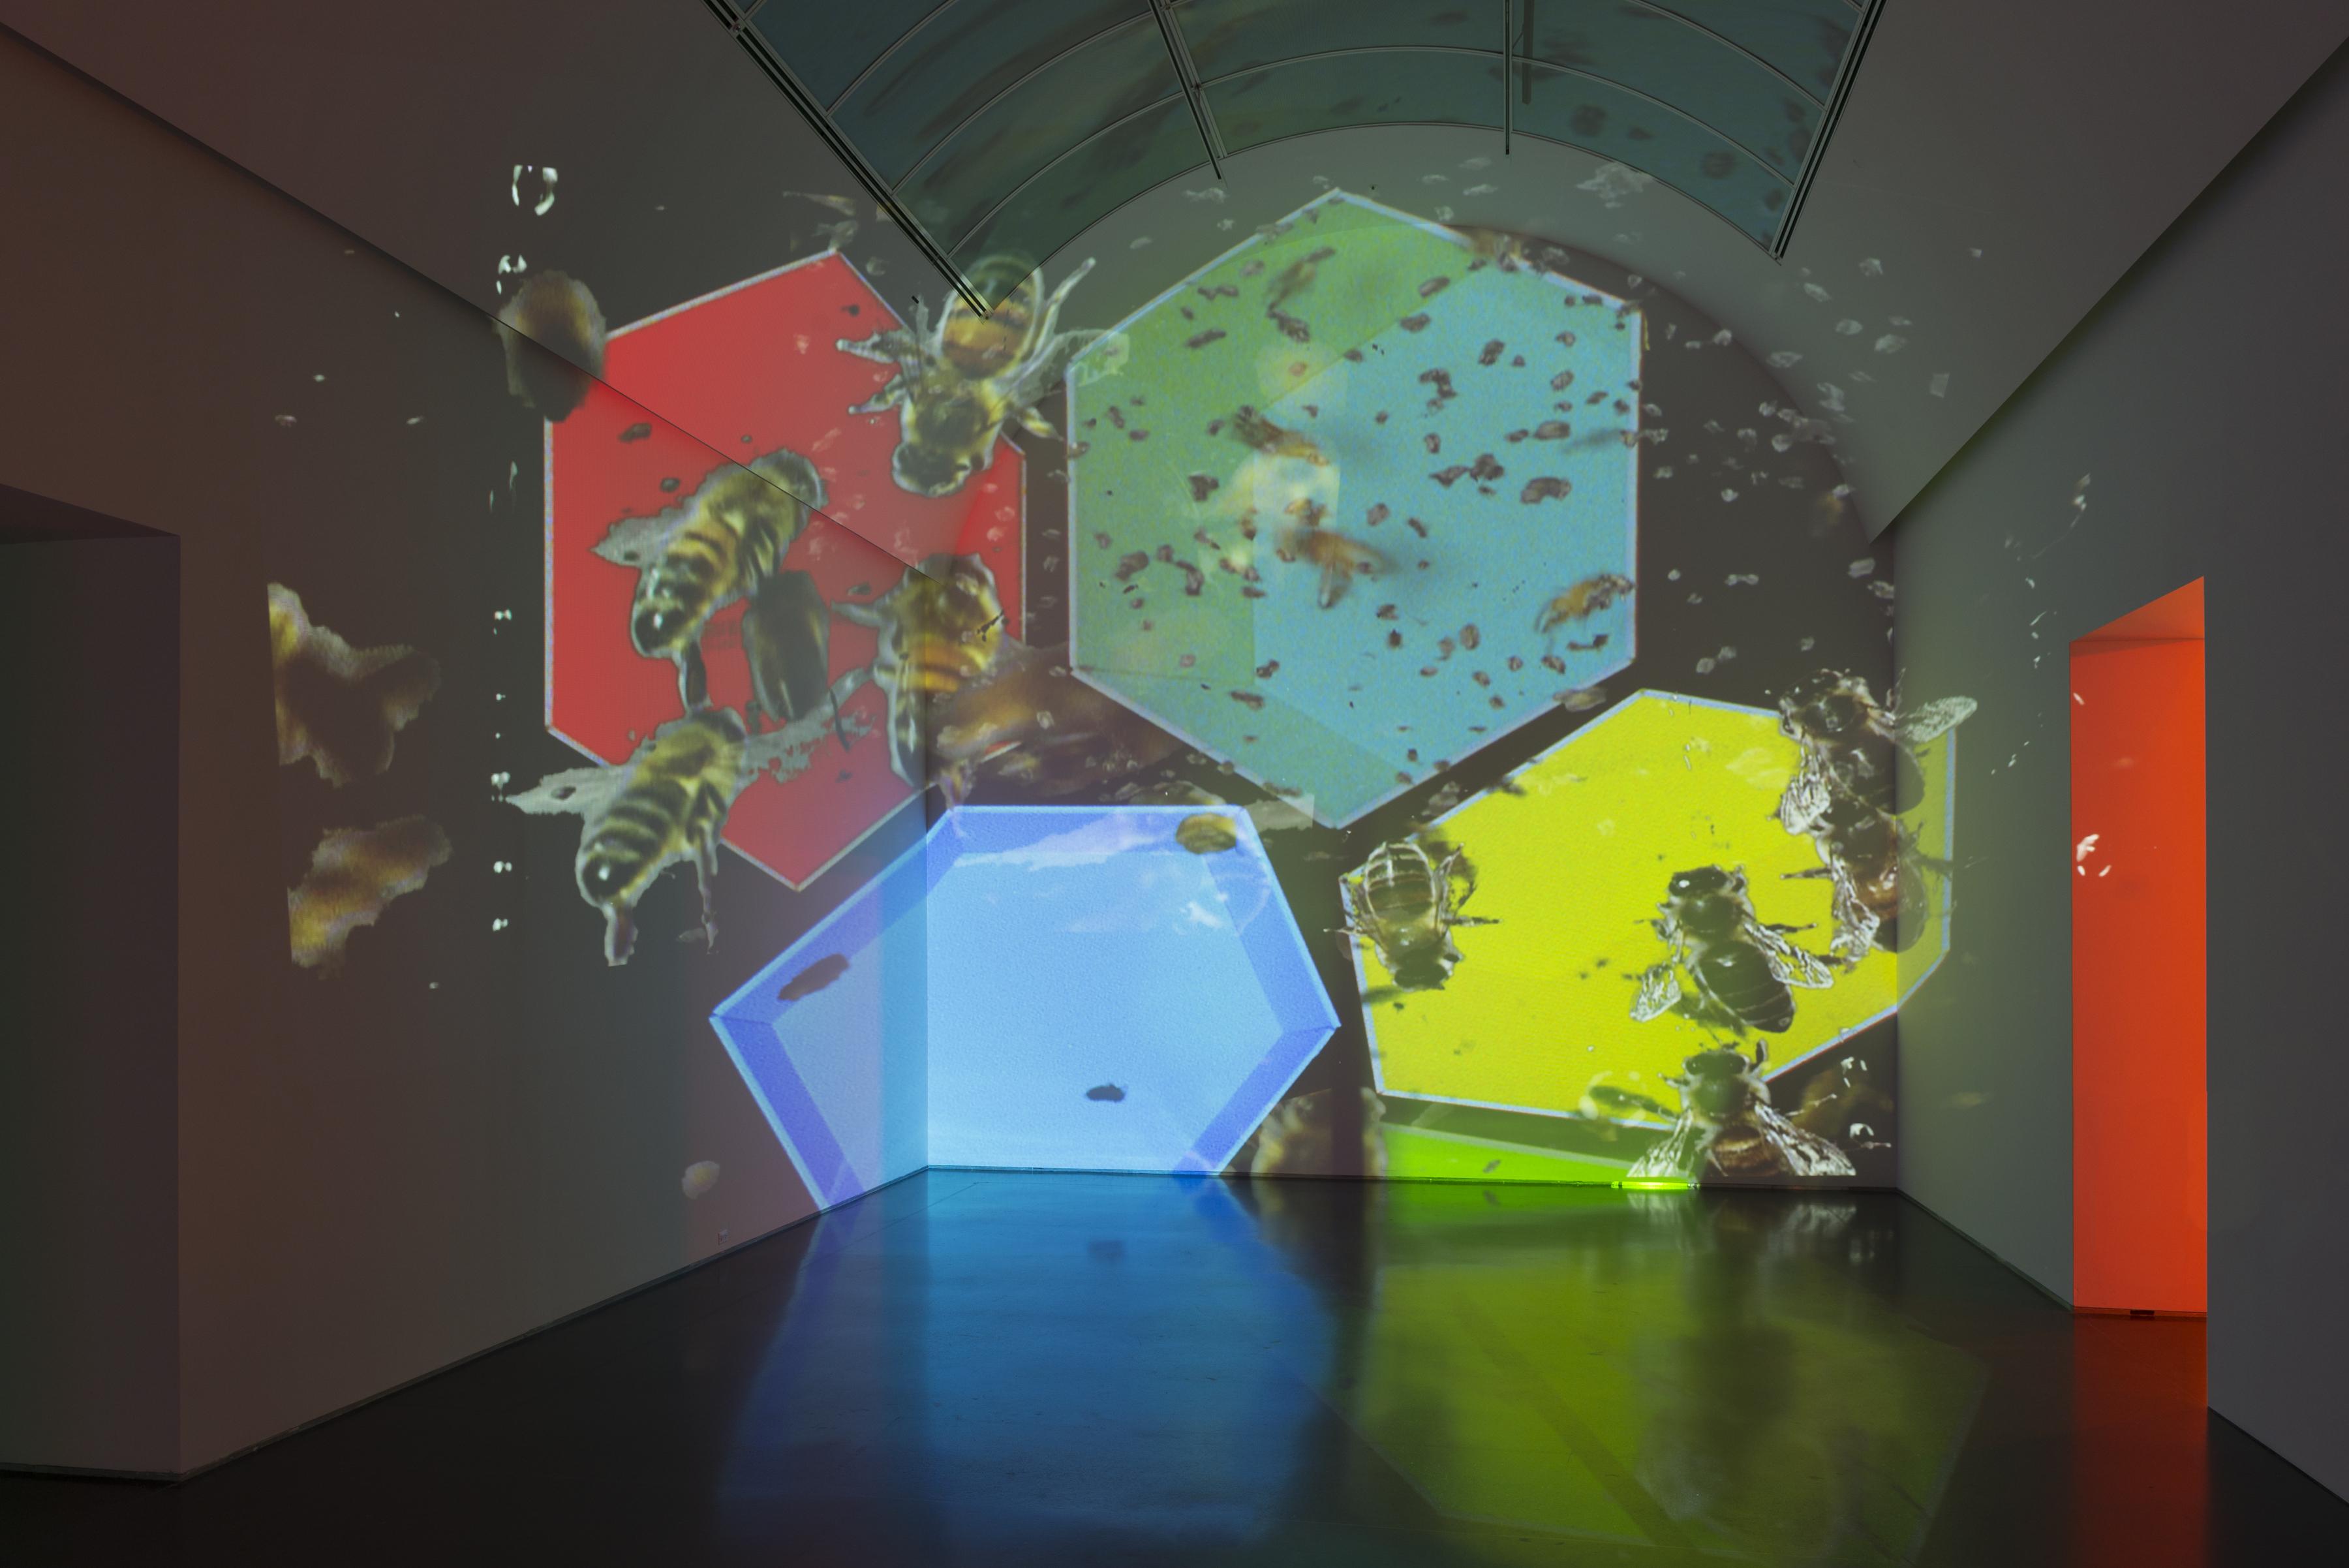 Five brightly colored hexagons swarming with bees are being projected against the end of a barrel-vaulted gallery. The door on the right glows orange.